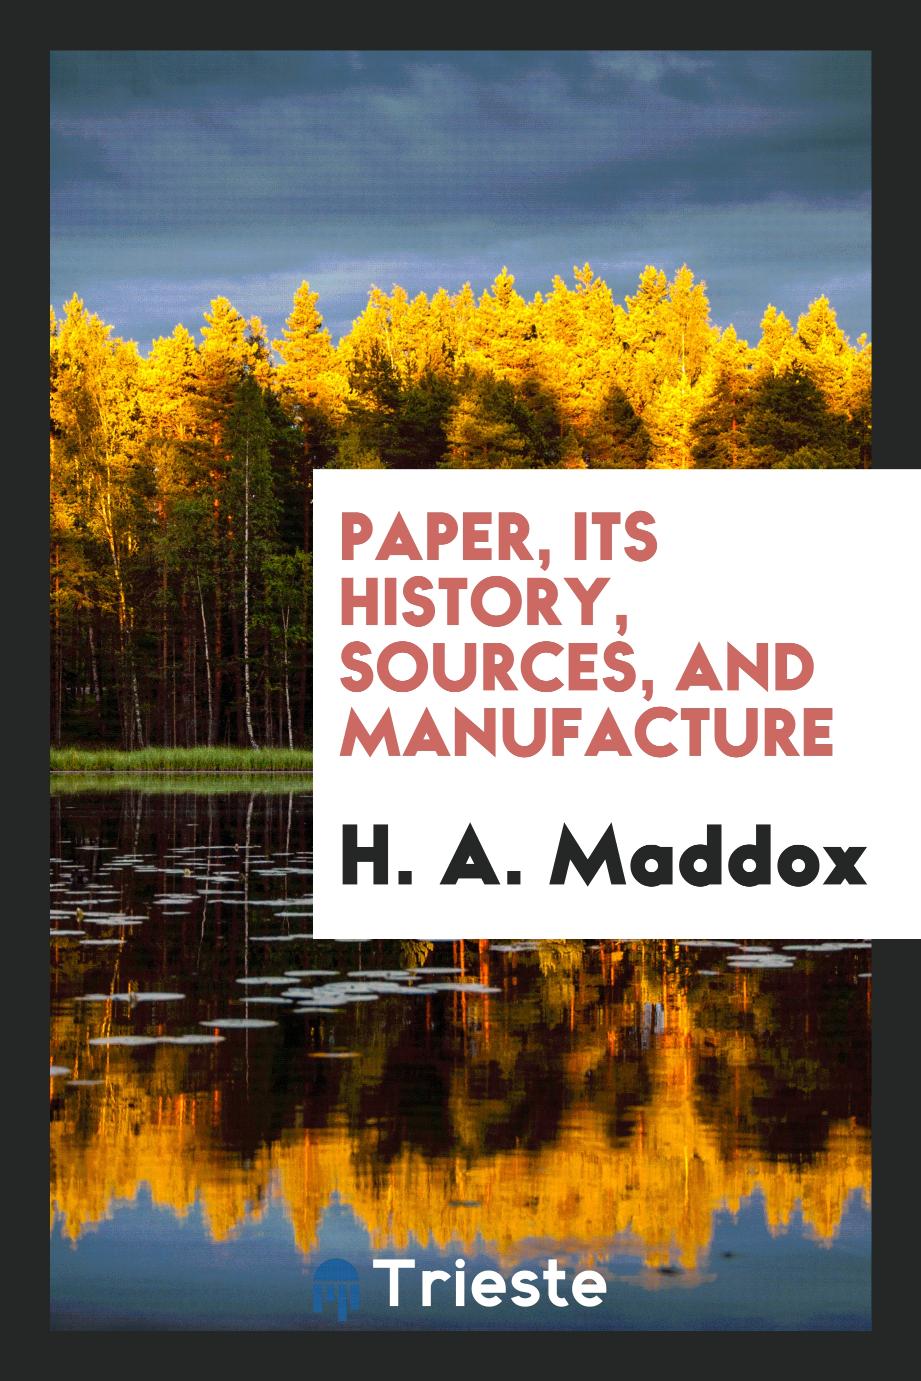 Paper, its history, sources, and manufacture